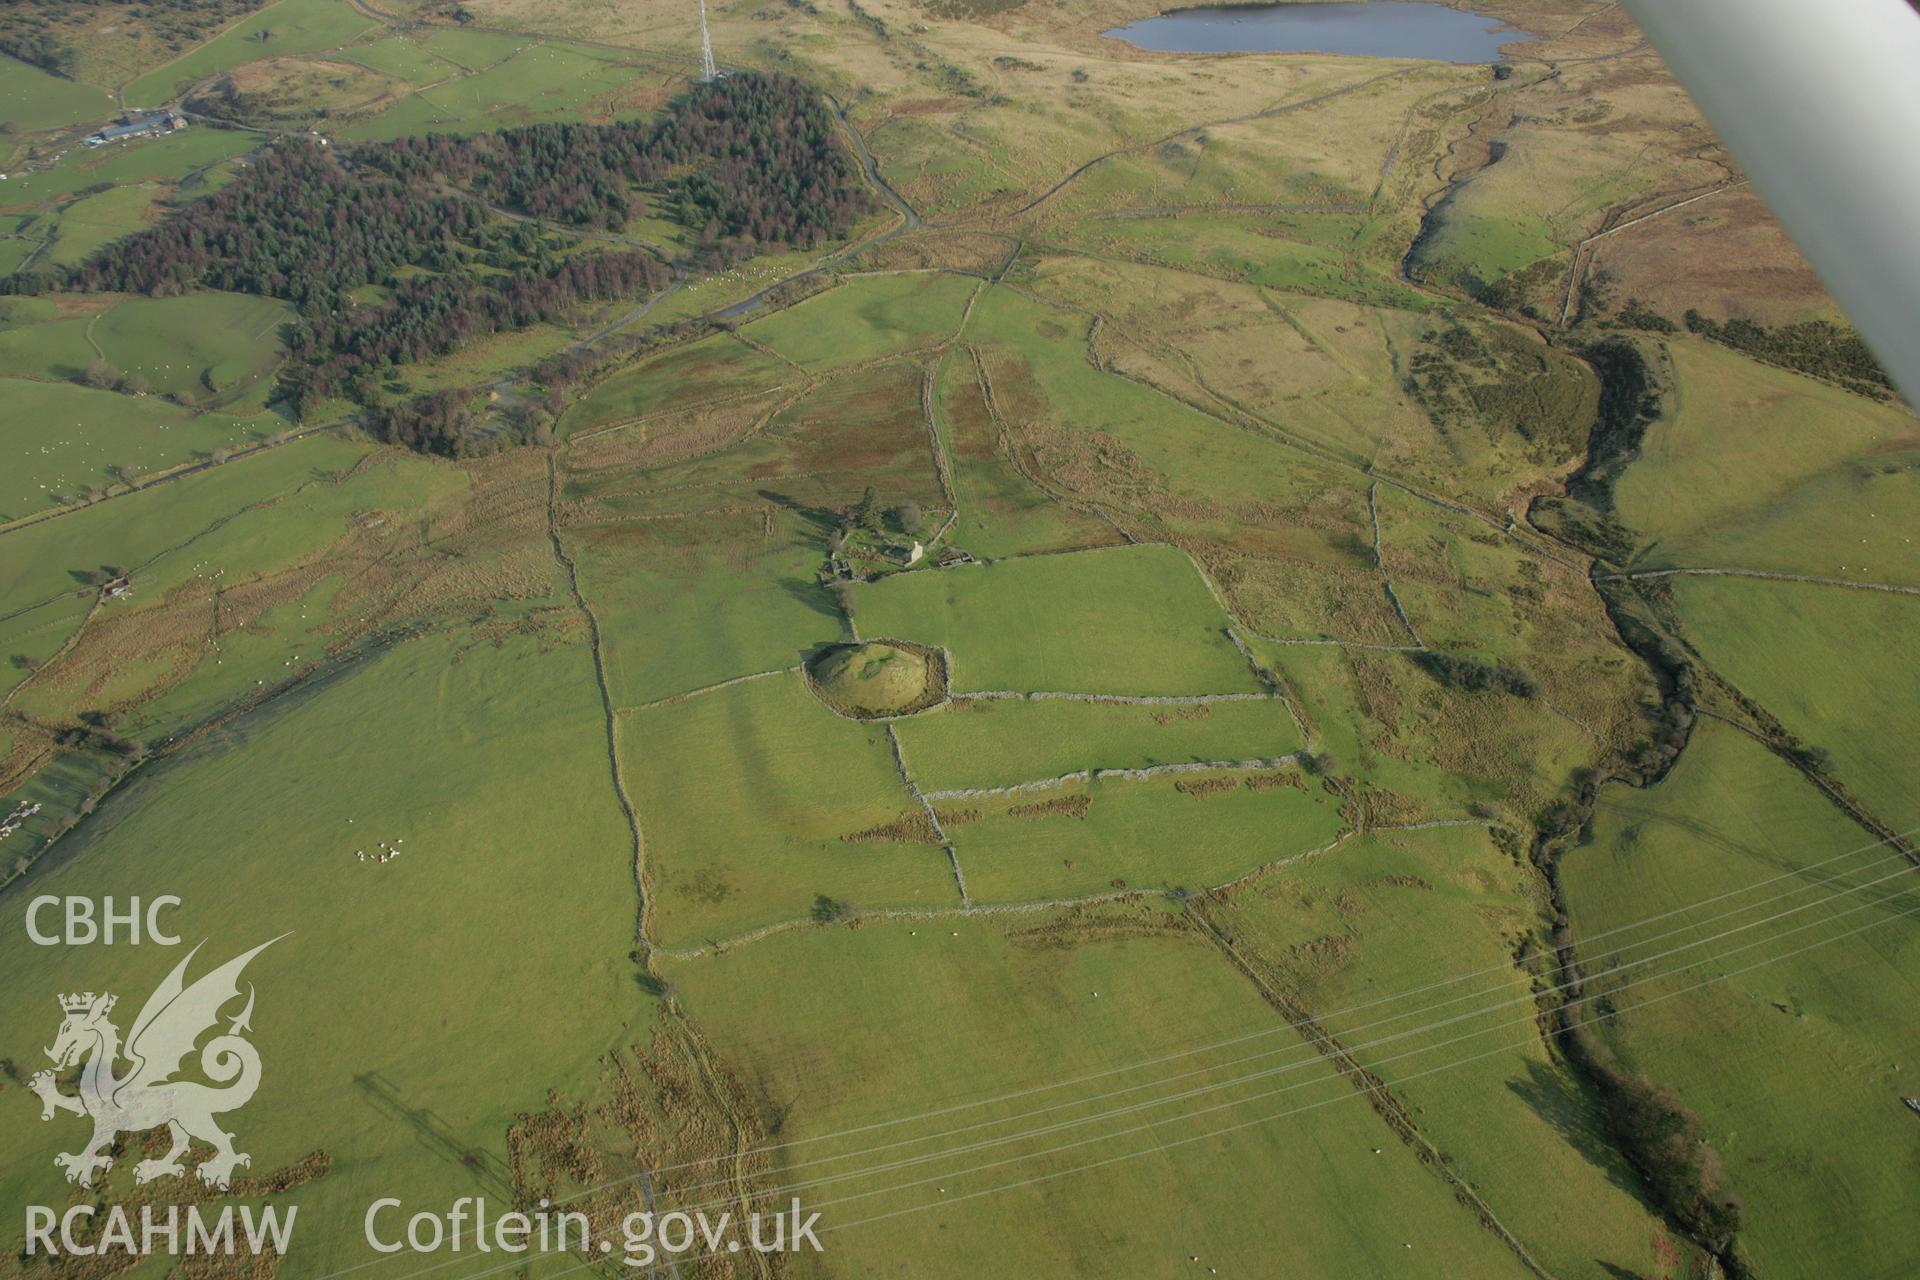 RCAHMW colour oblique aerial photograph of Tomen-y-Mur. Taken on 25 January 2007 by Toby Driver